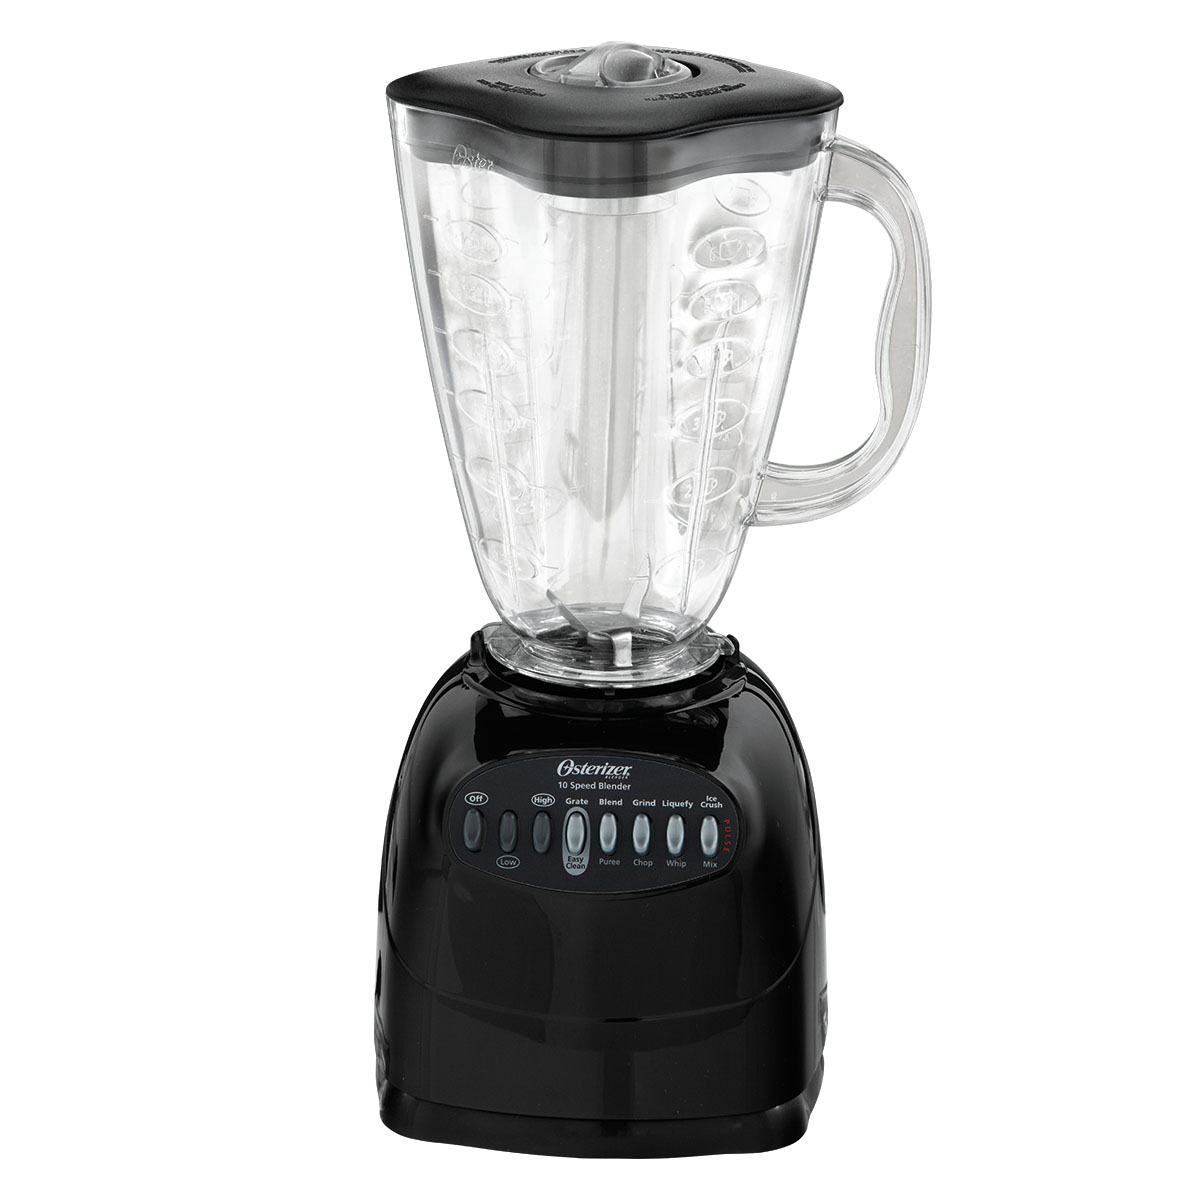 Oster® Classic Series Blender with BPA-Free Plastic Jar, Black | Oster